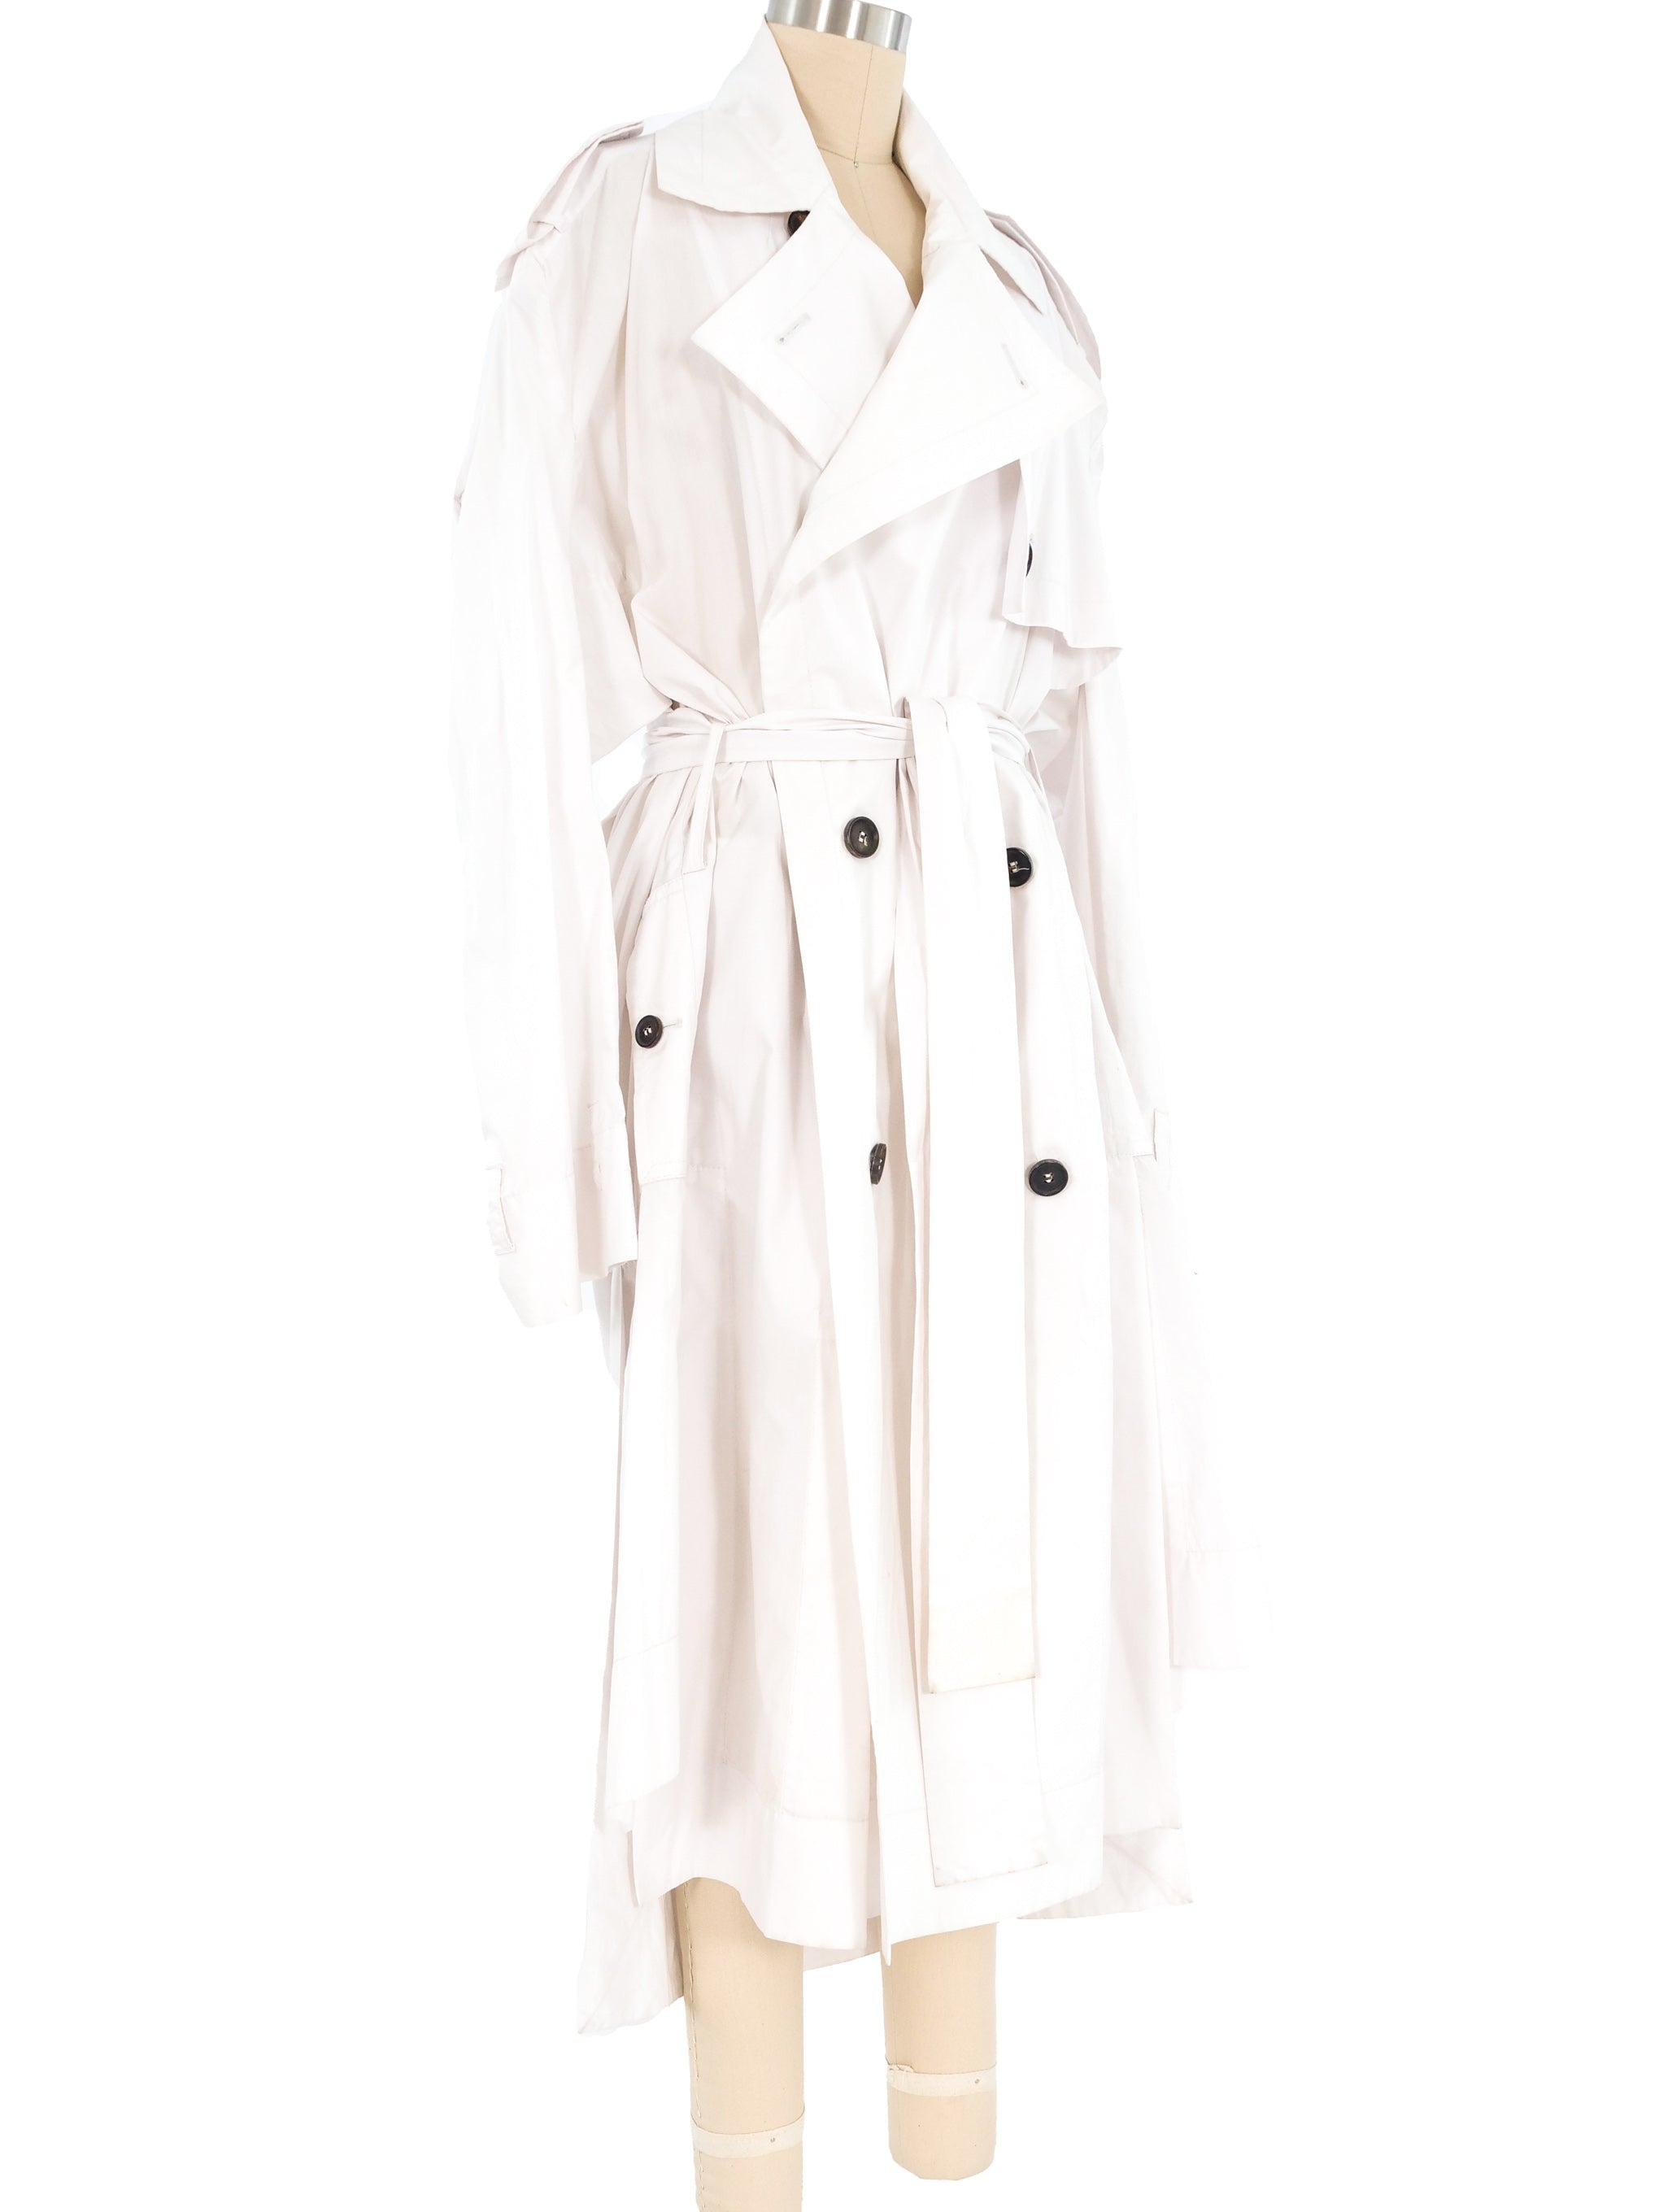 Vivienne Westwood White Trench Coat